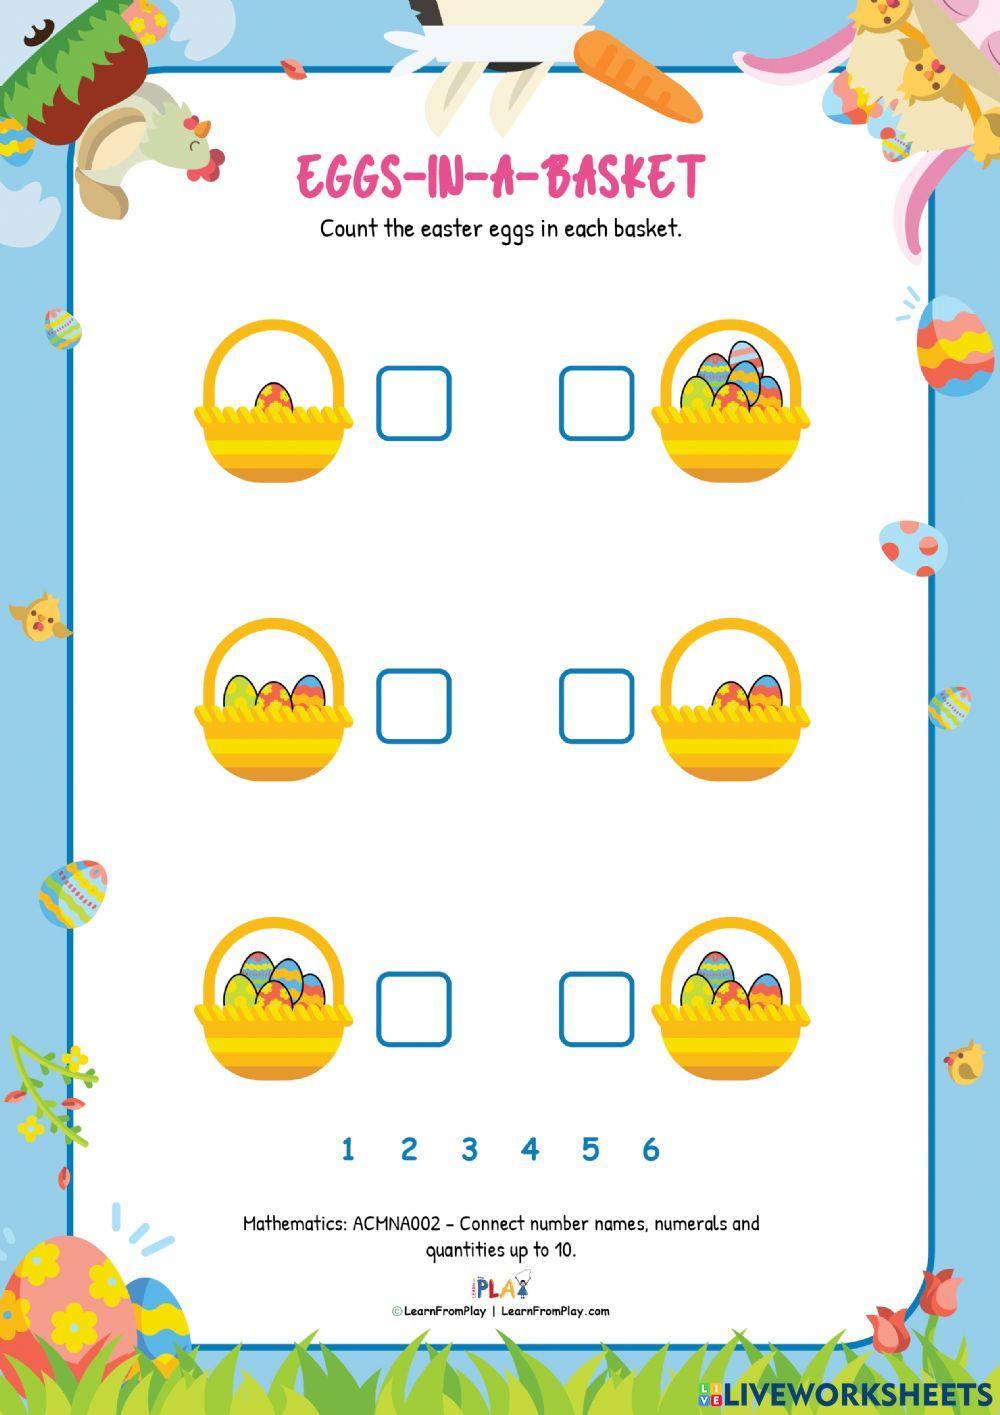 Easter Hat-Astrophe - Eggs-in-a-Basket